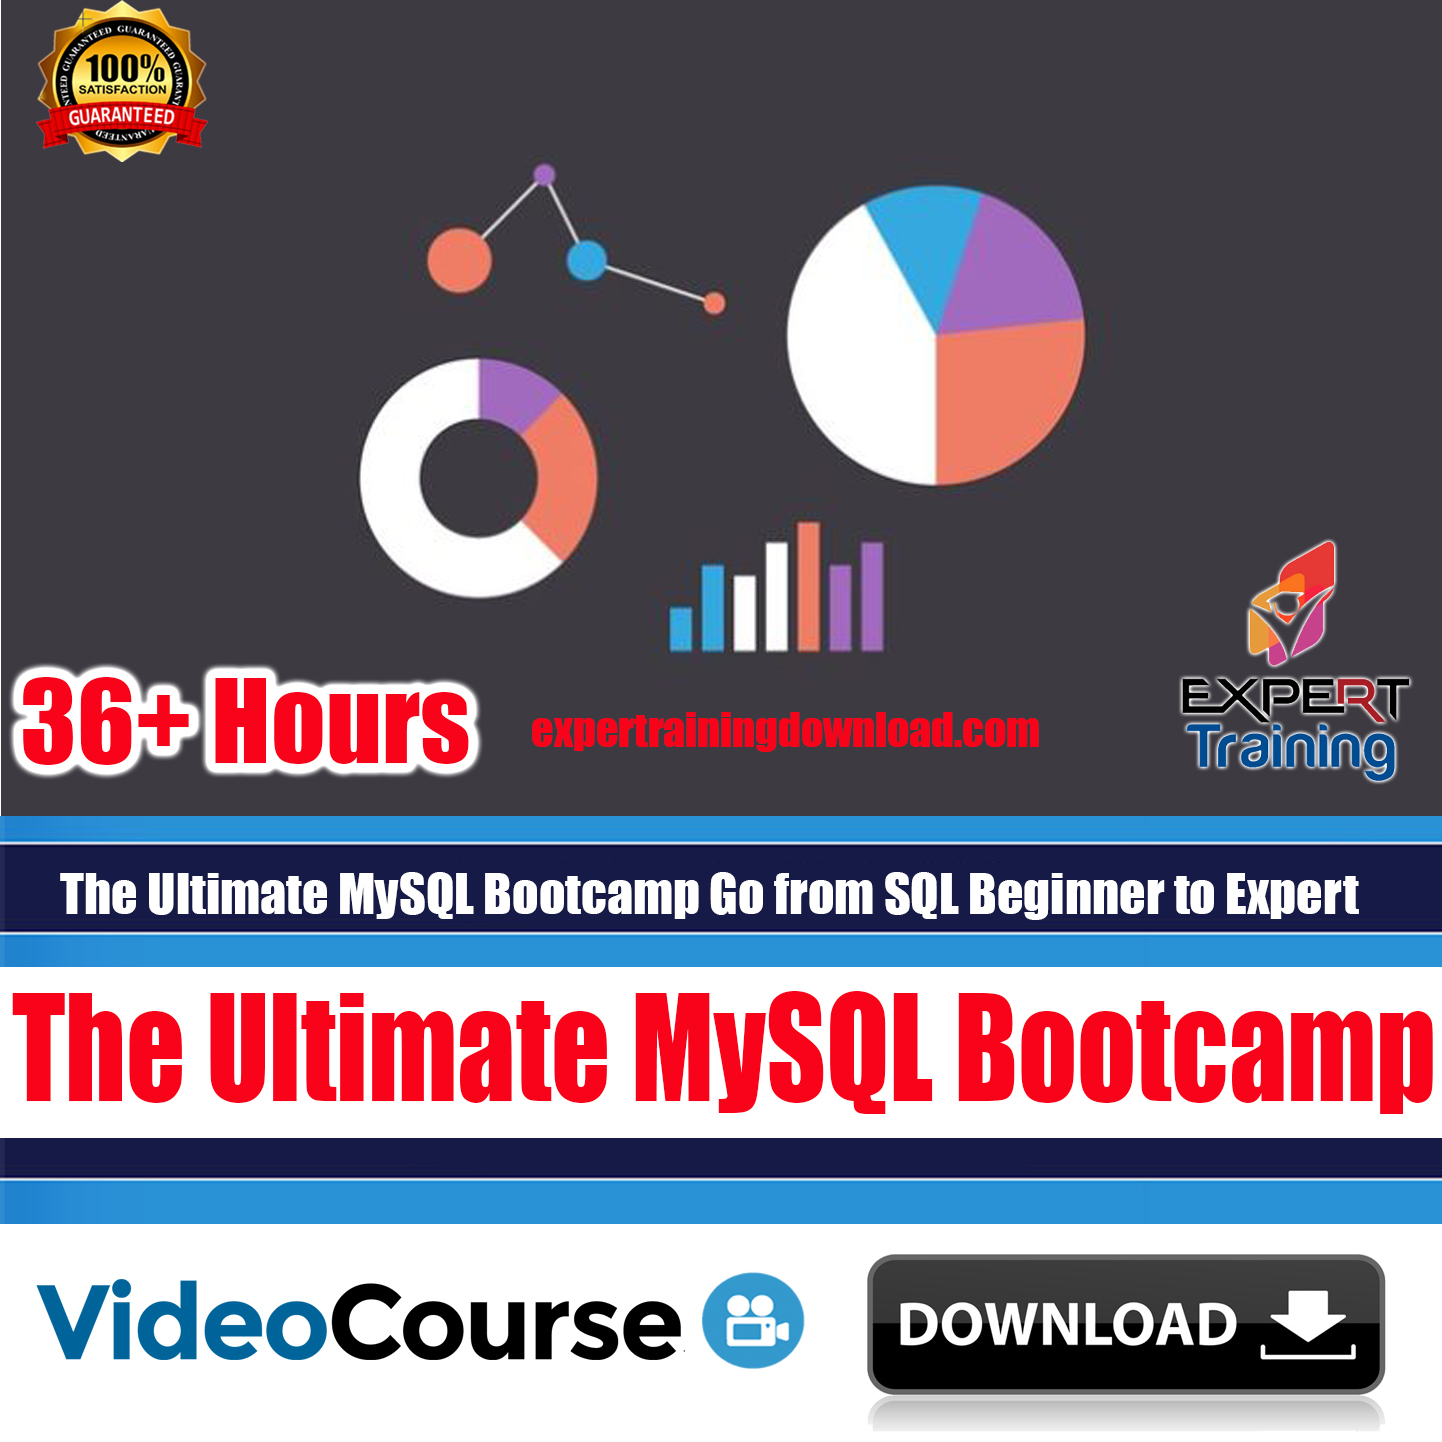 The Ultimate MySQL Bootcamp Go from SQL Beginner to Expert